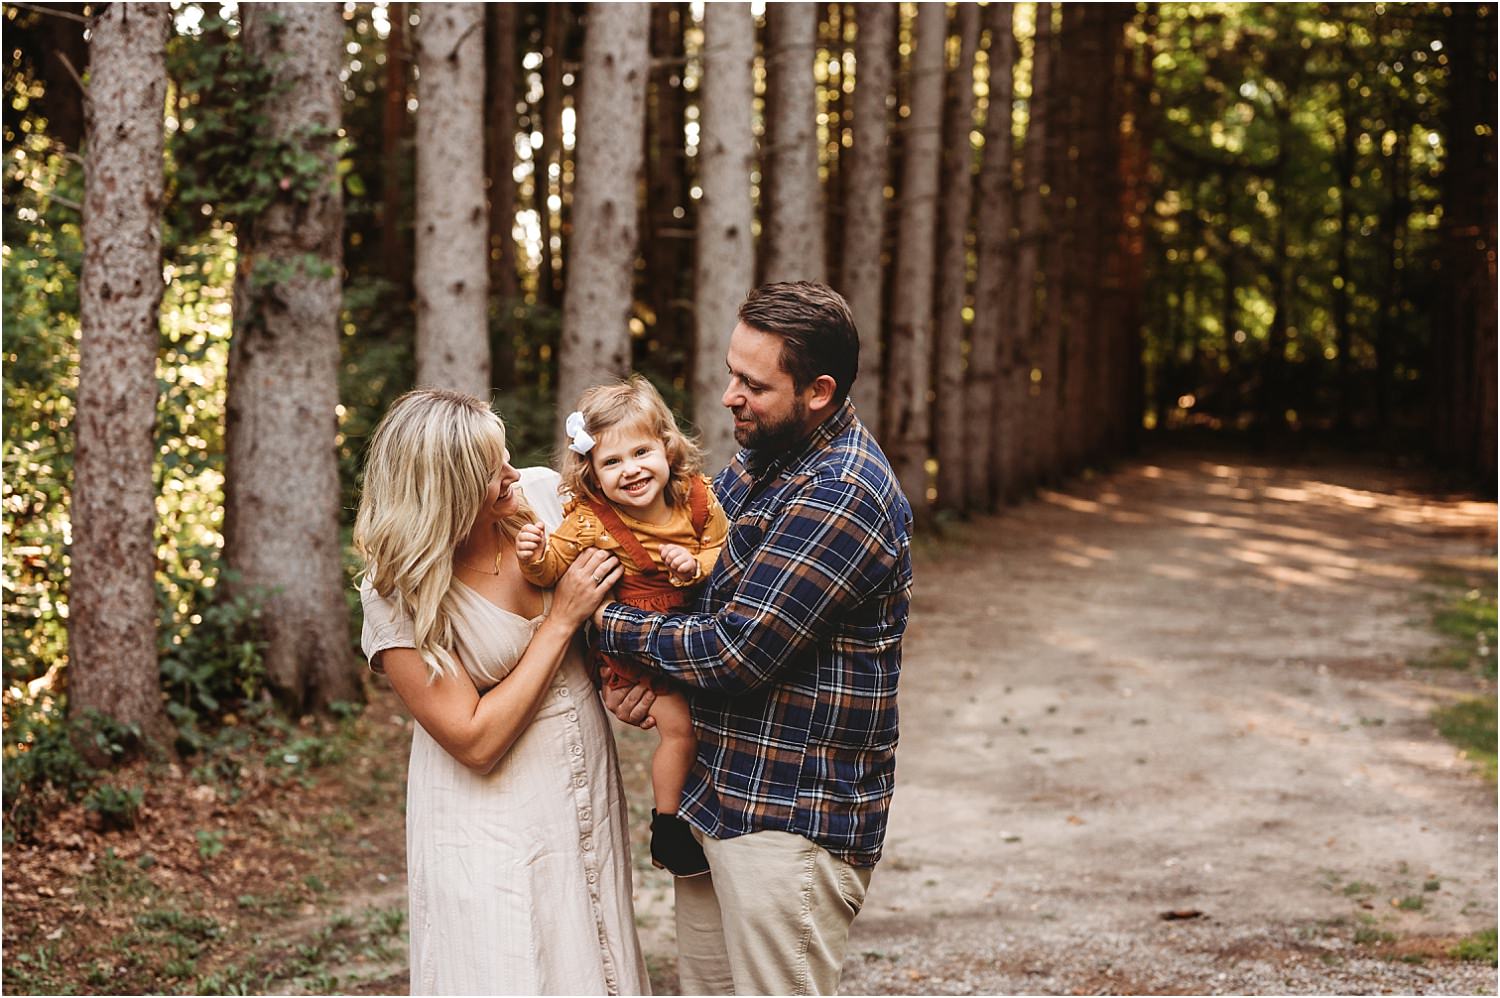 Fall Family Session | The C. Family